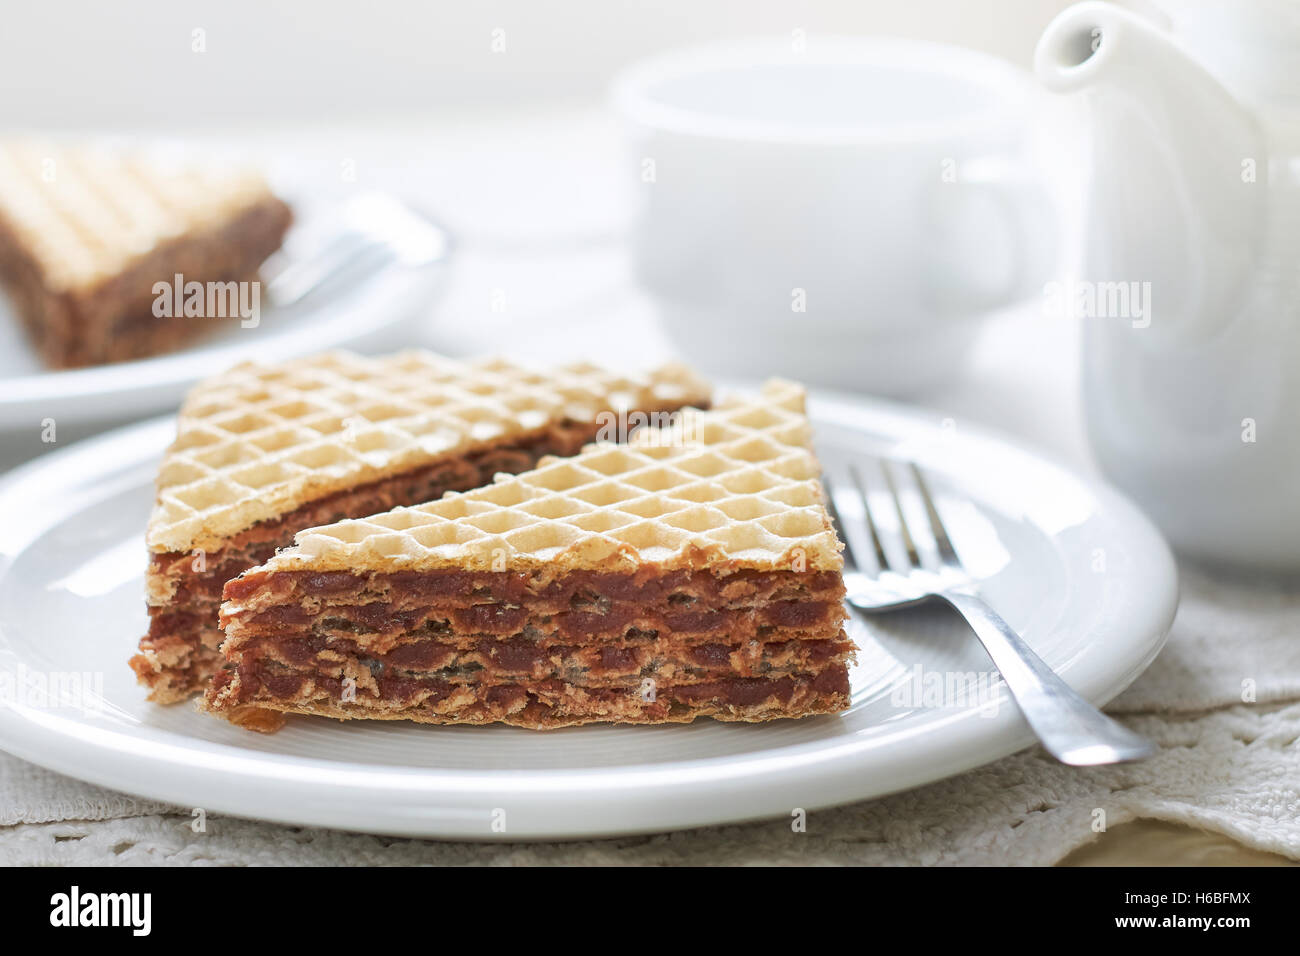 Wafer sheets filled with caramelized sugar and hazelnut cream served on white plate Stock Photo